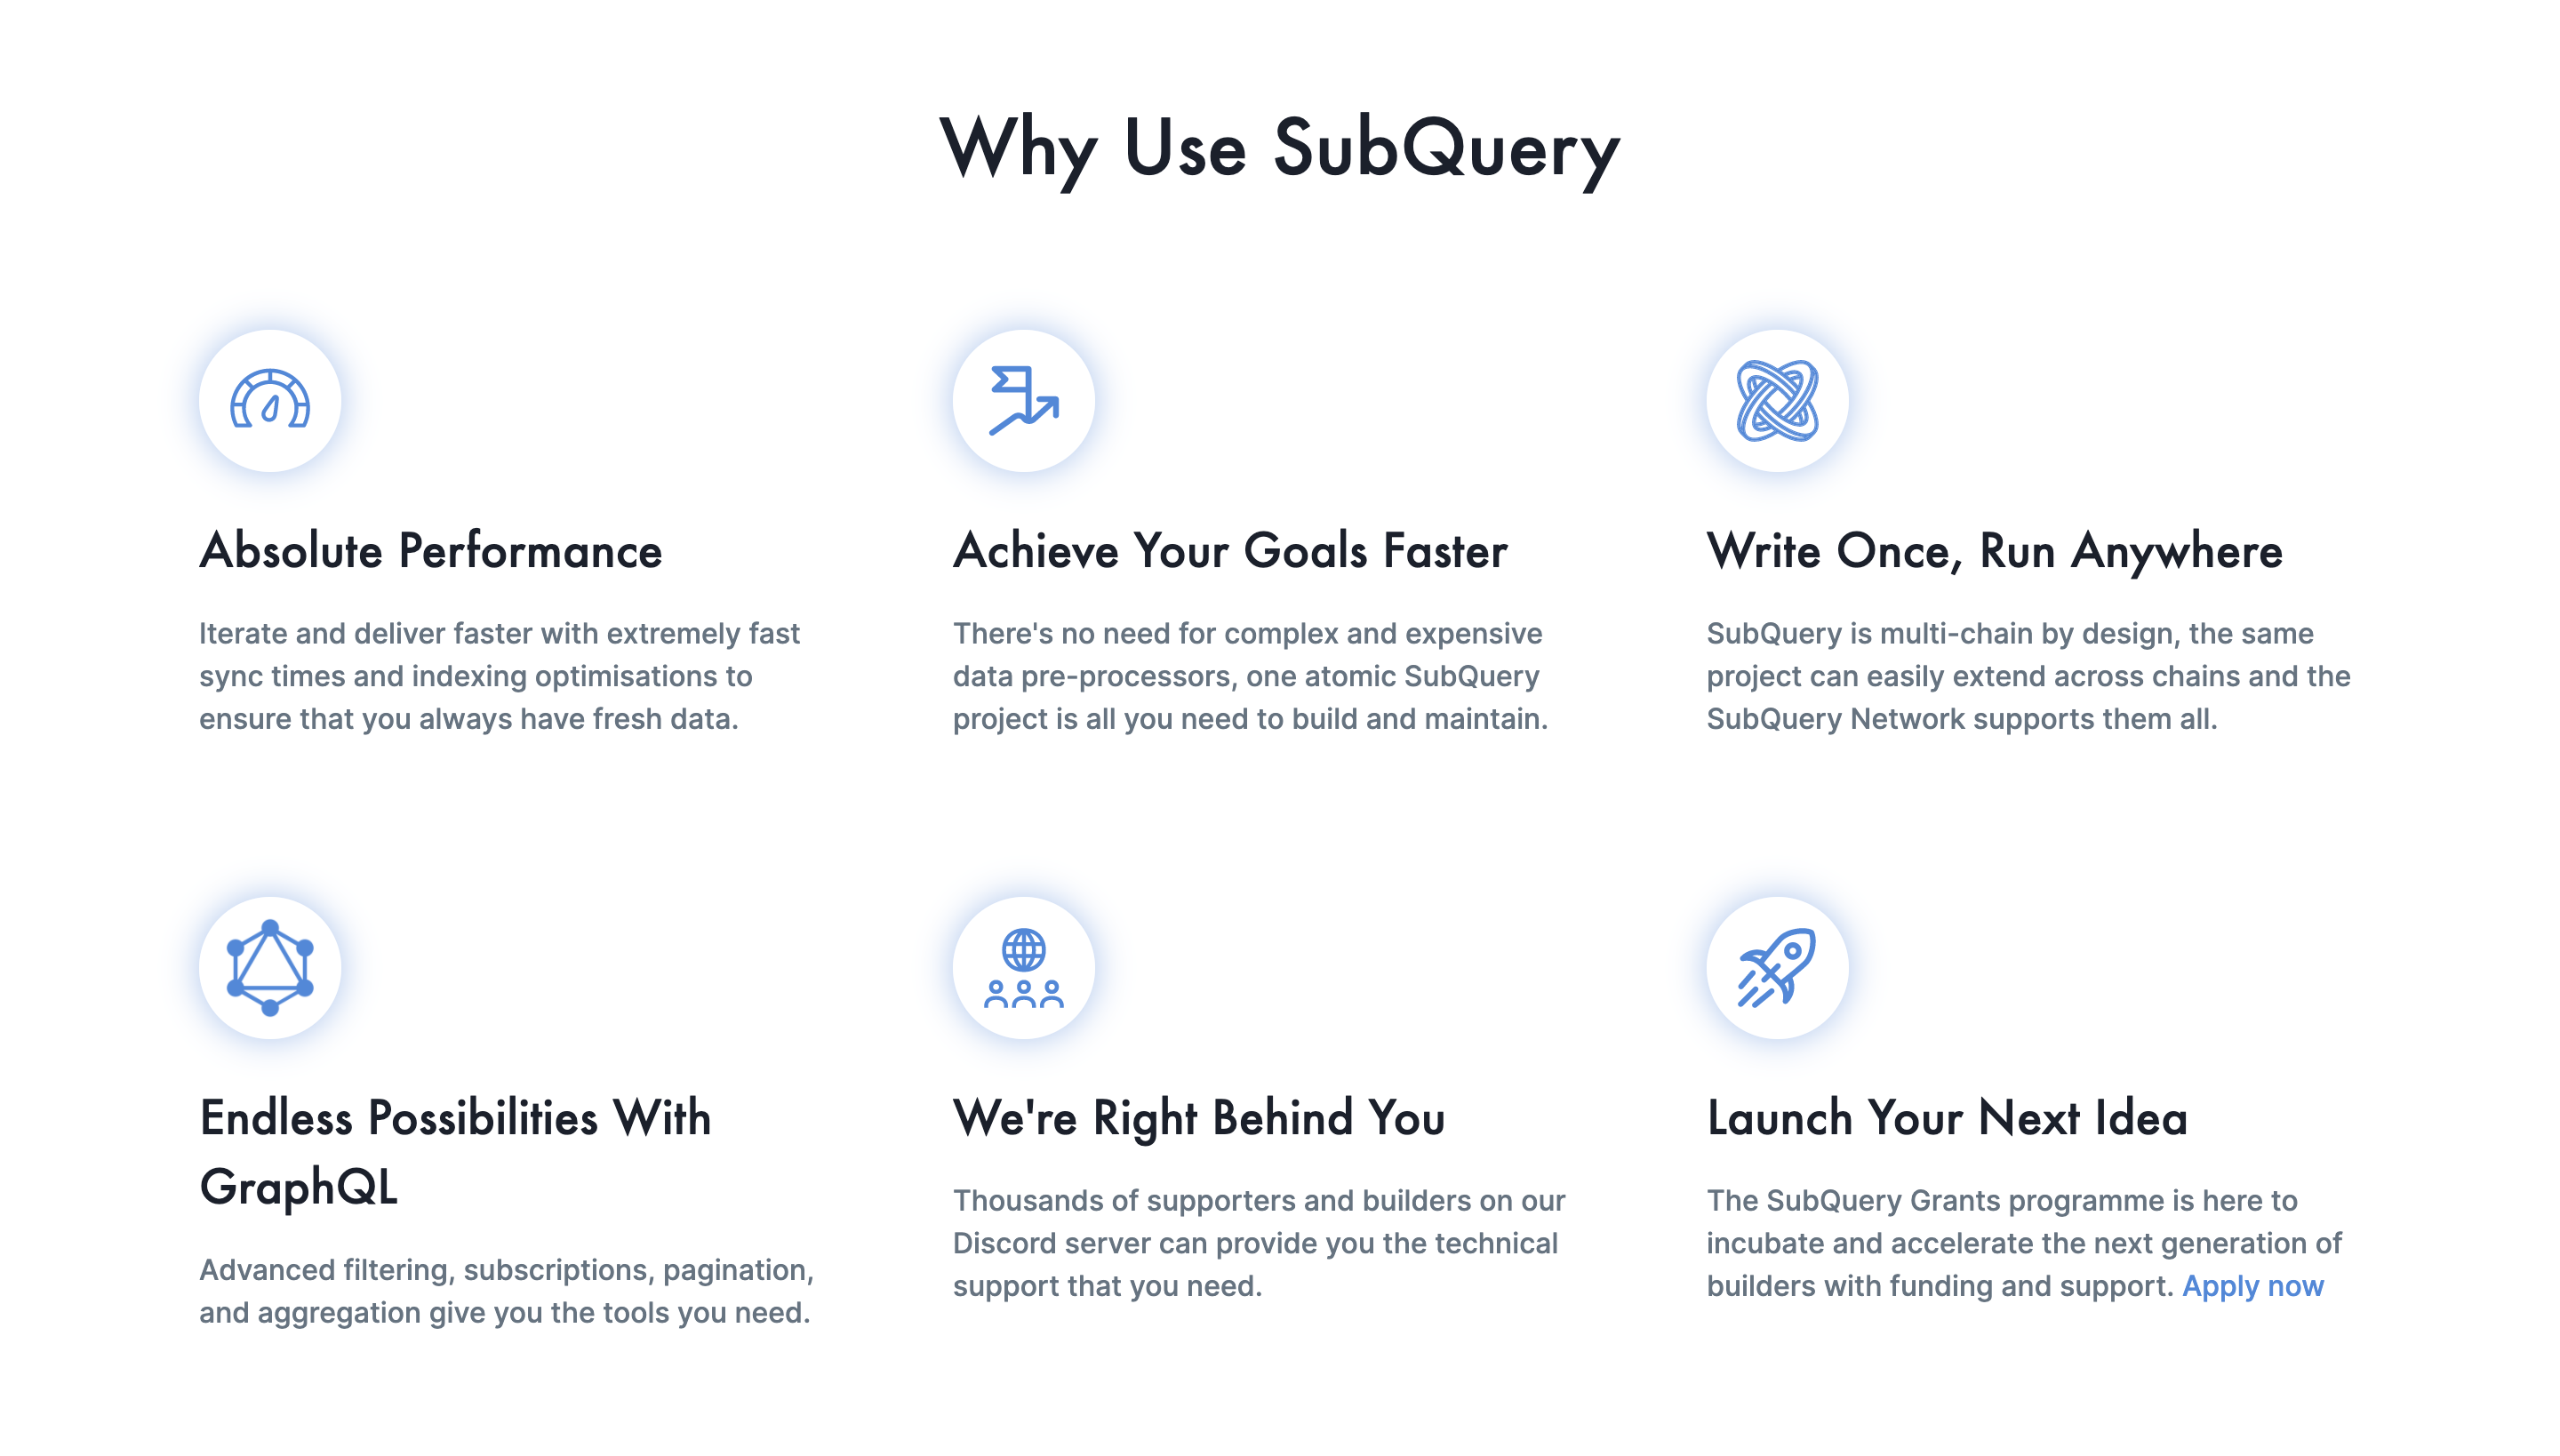 SubQuery Network About